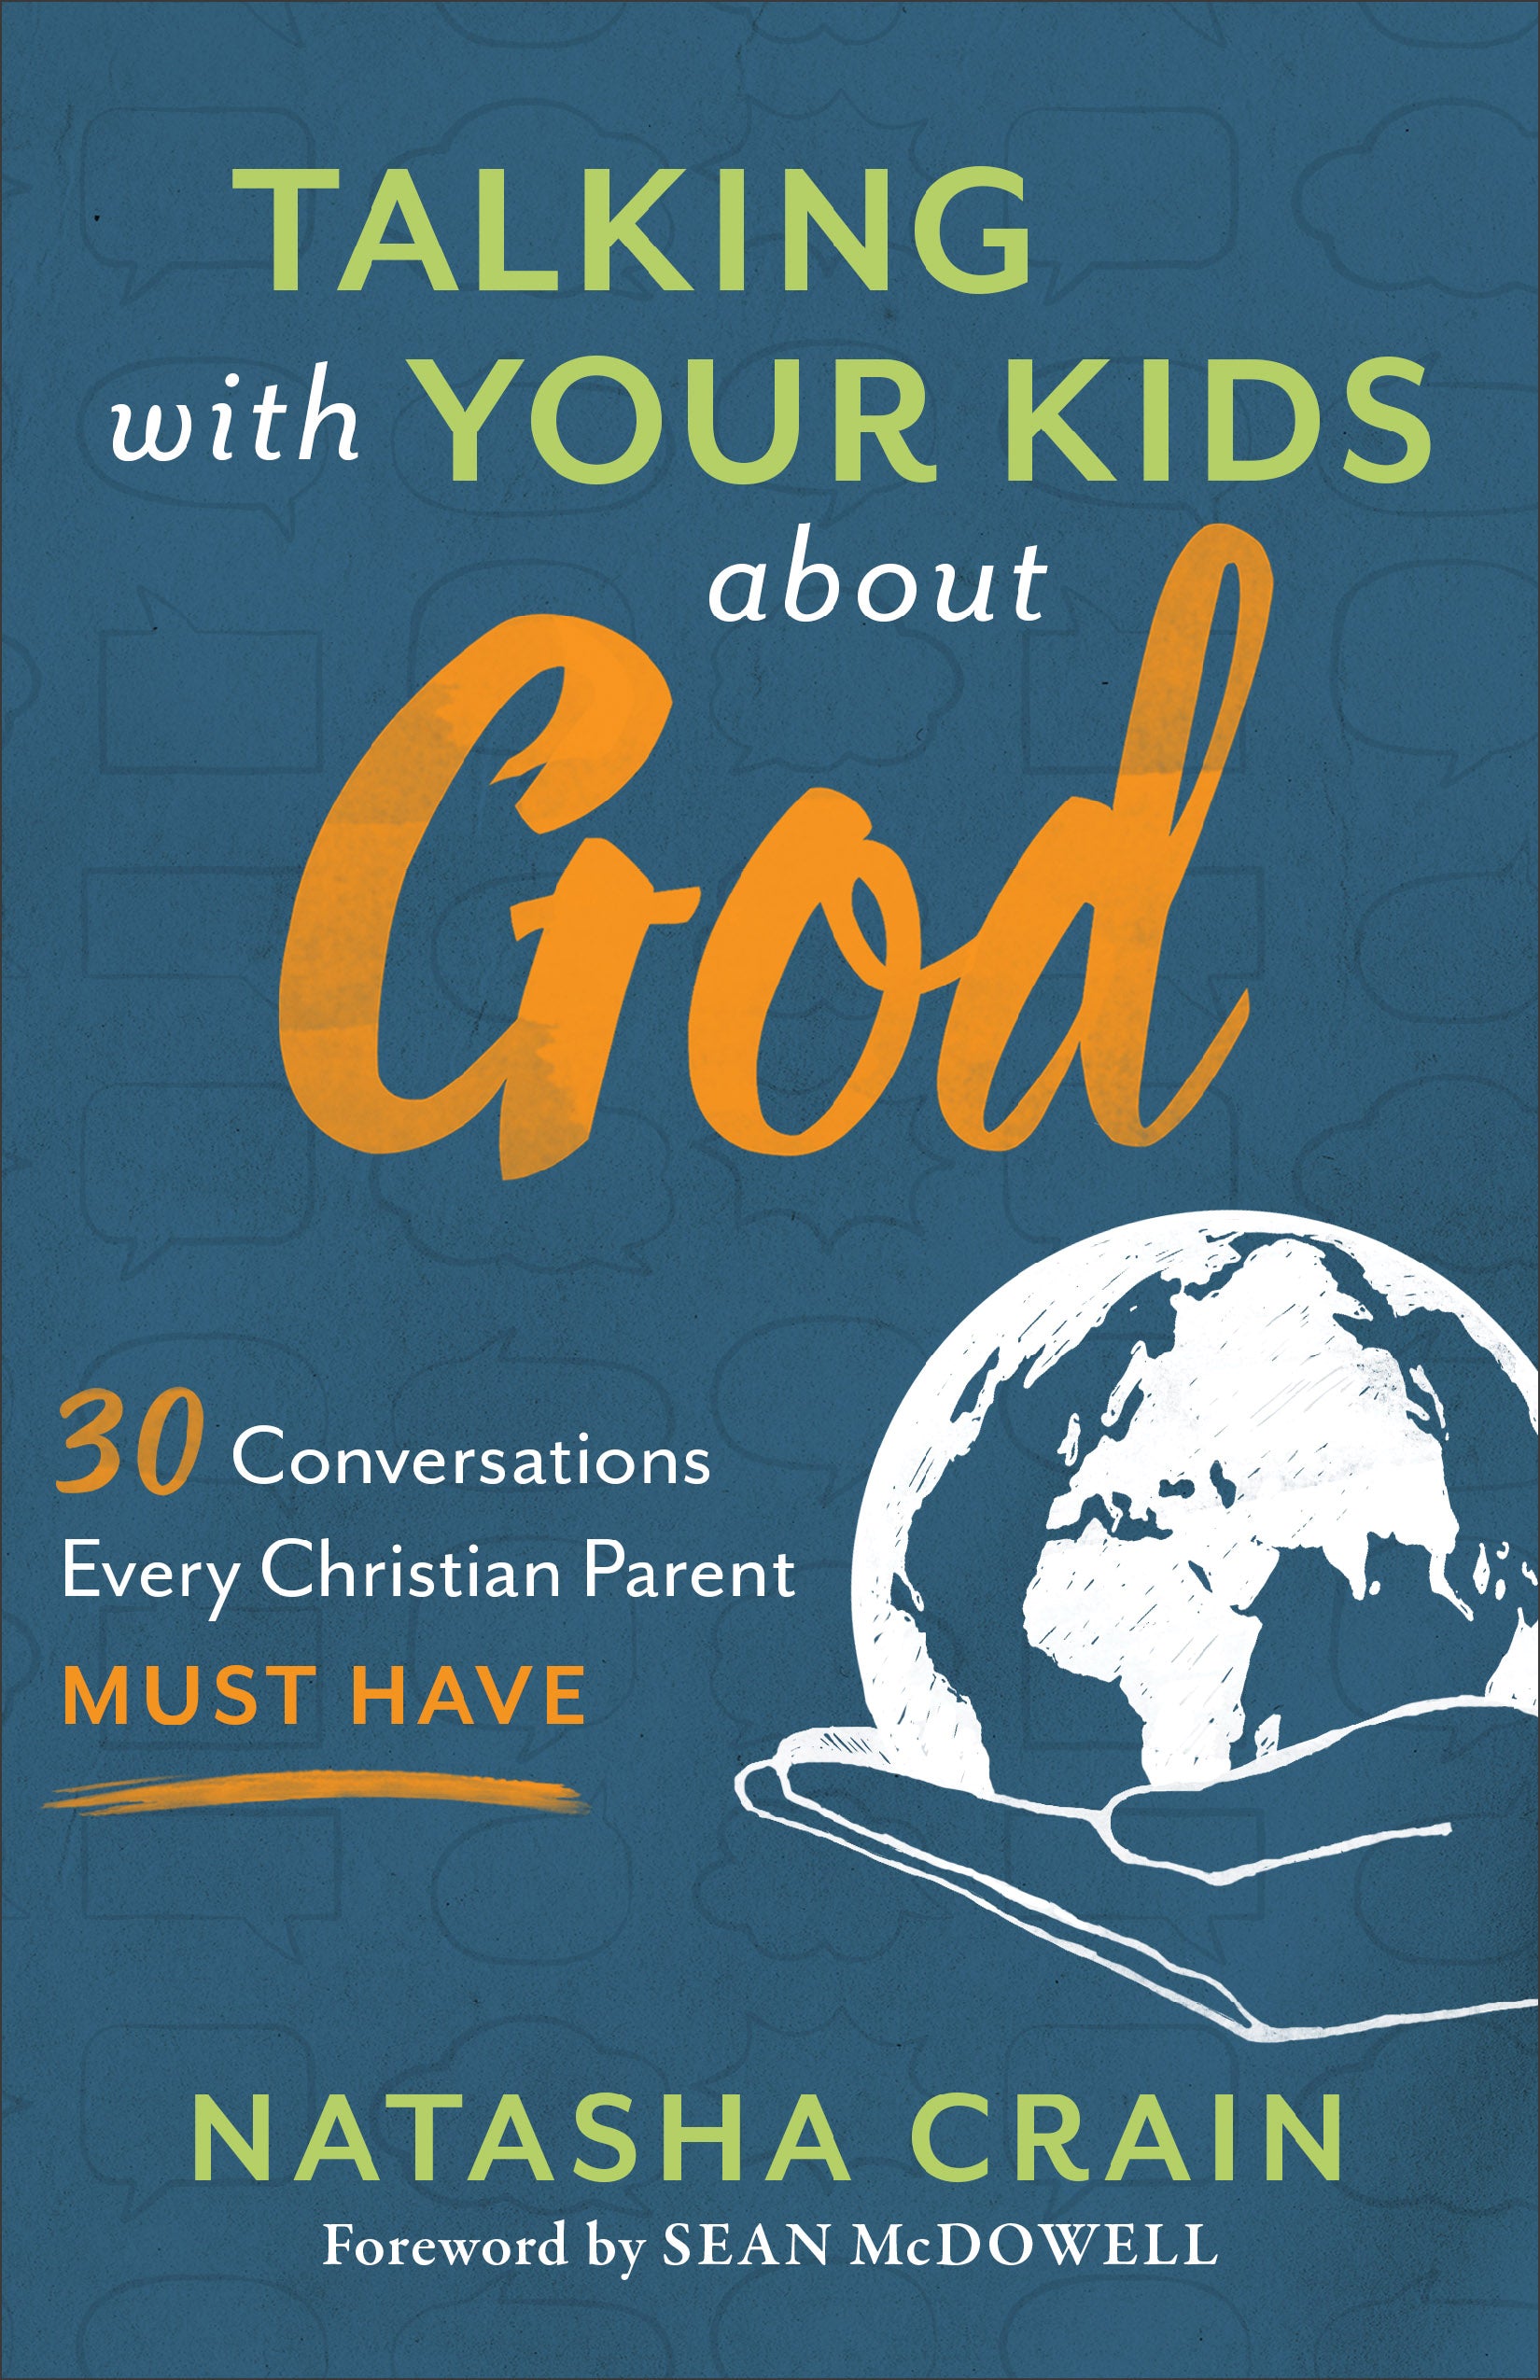 Image of Talking with Your Kids about God other